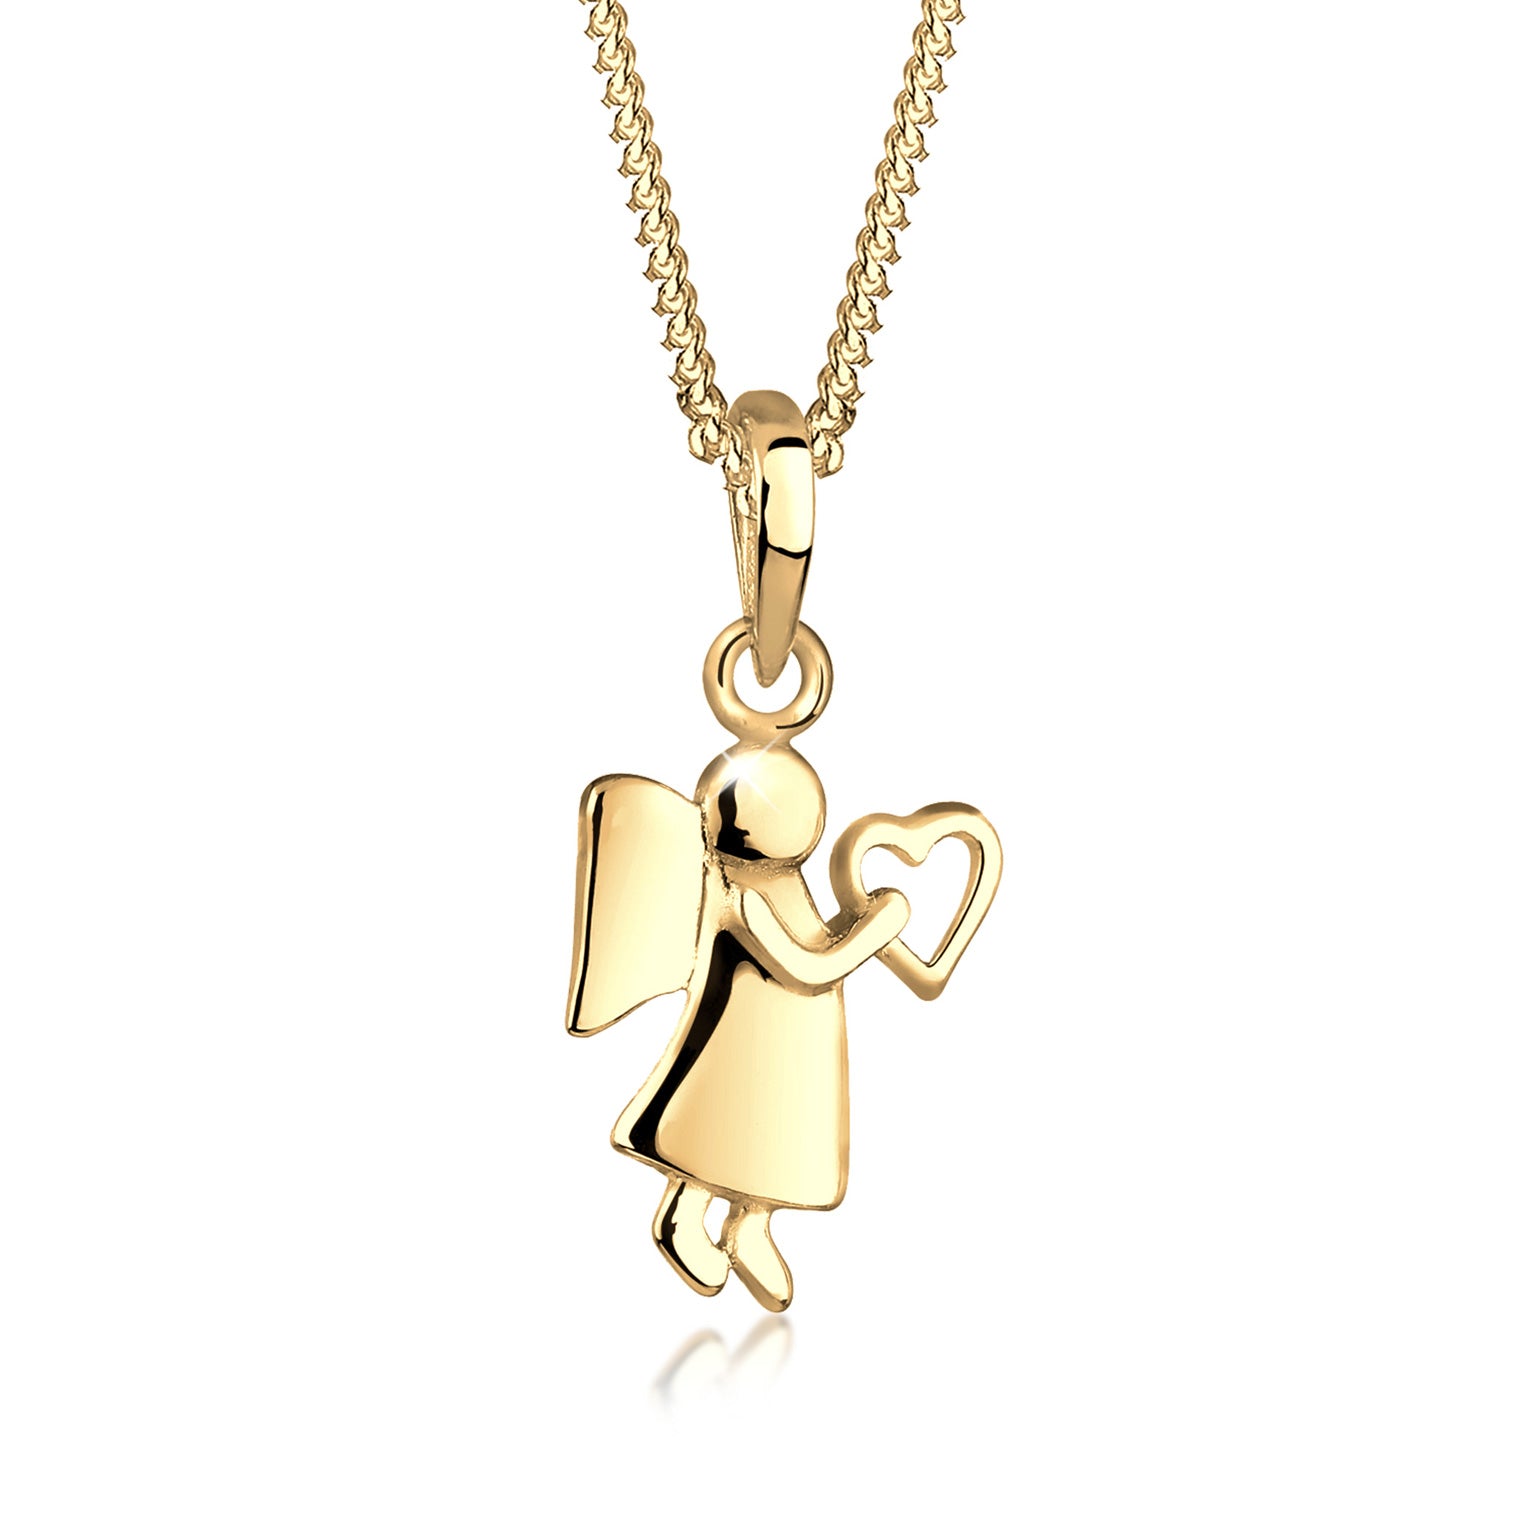 Angel caller necklace with pendant